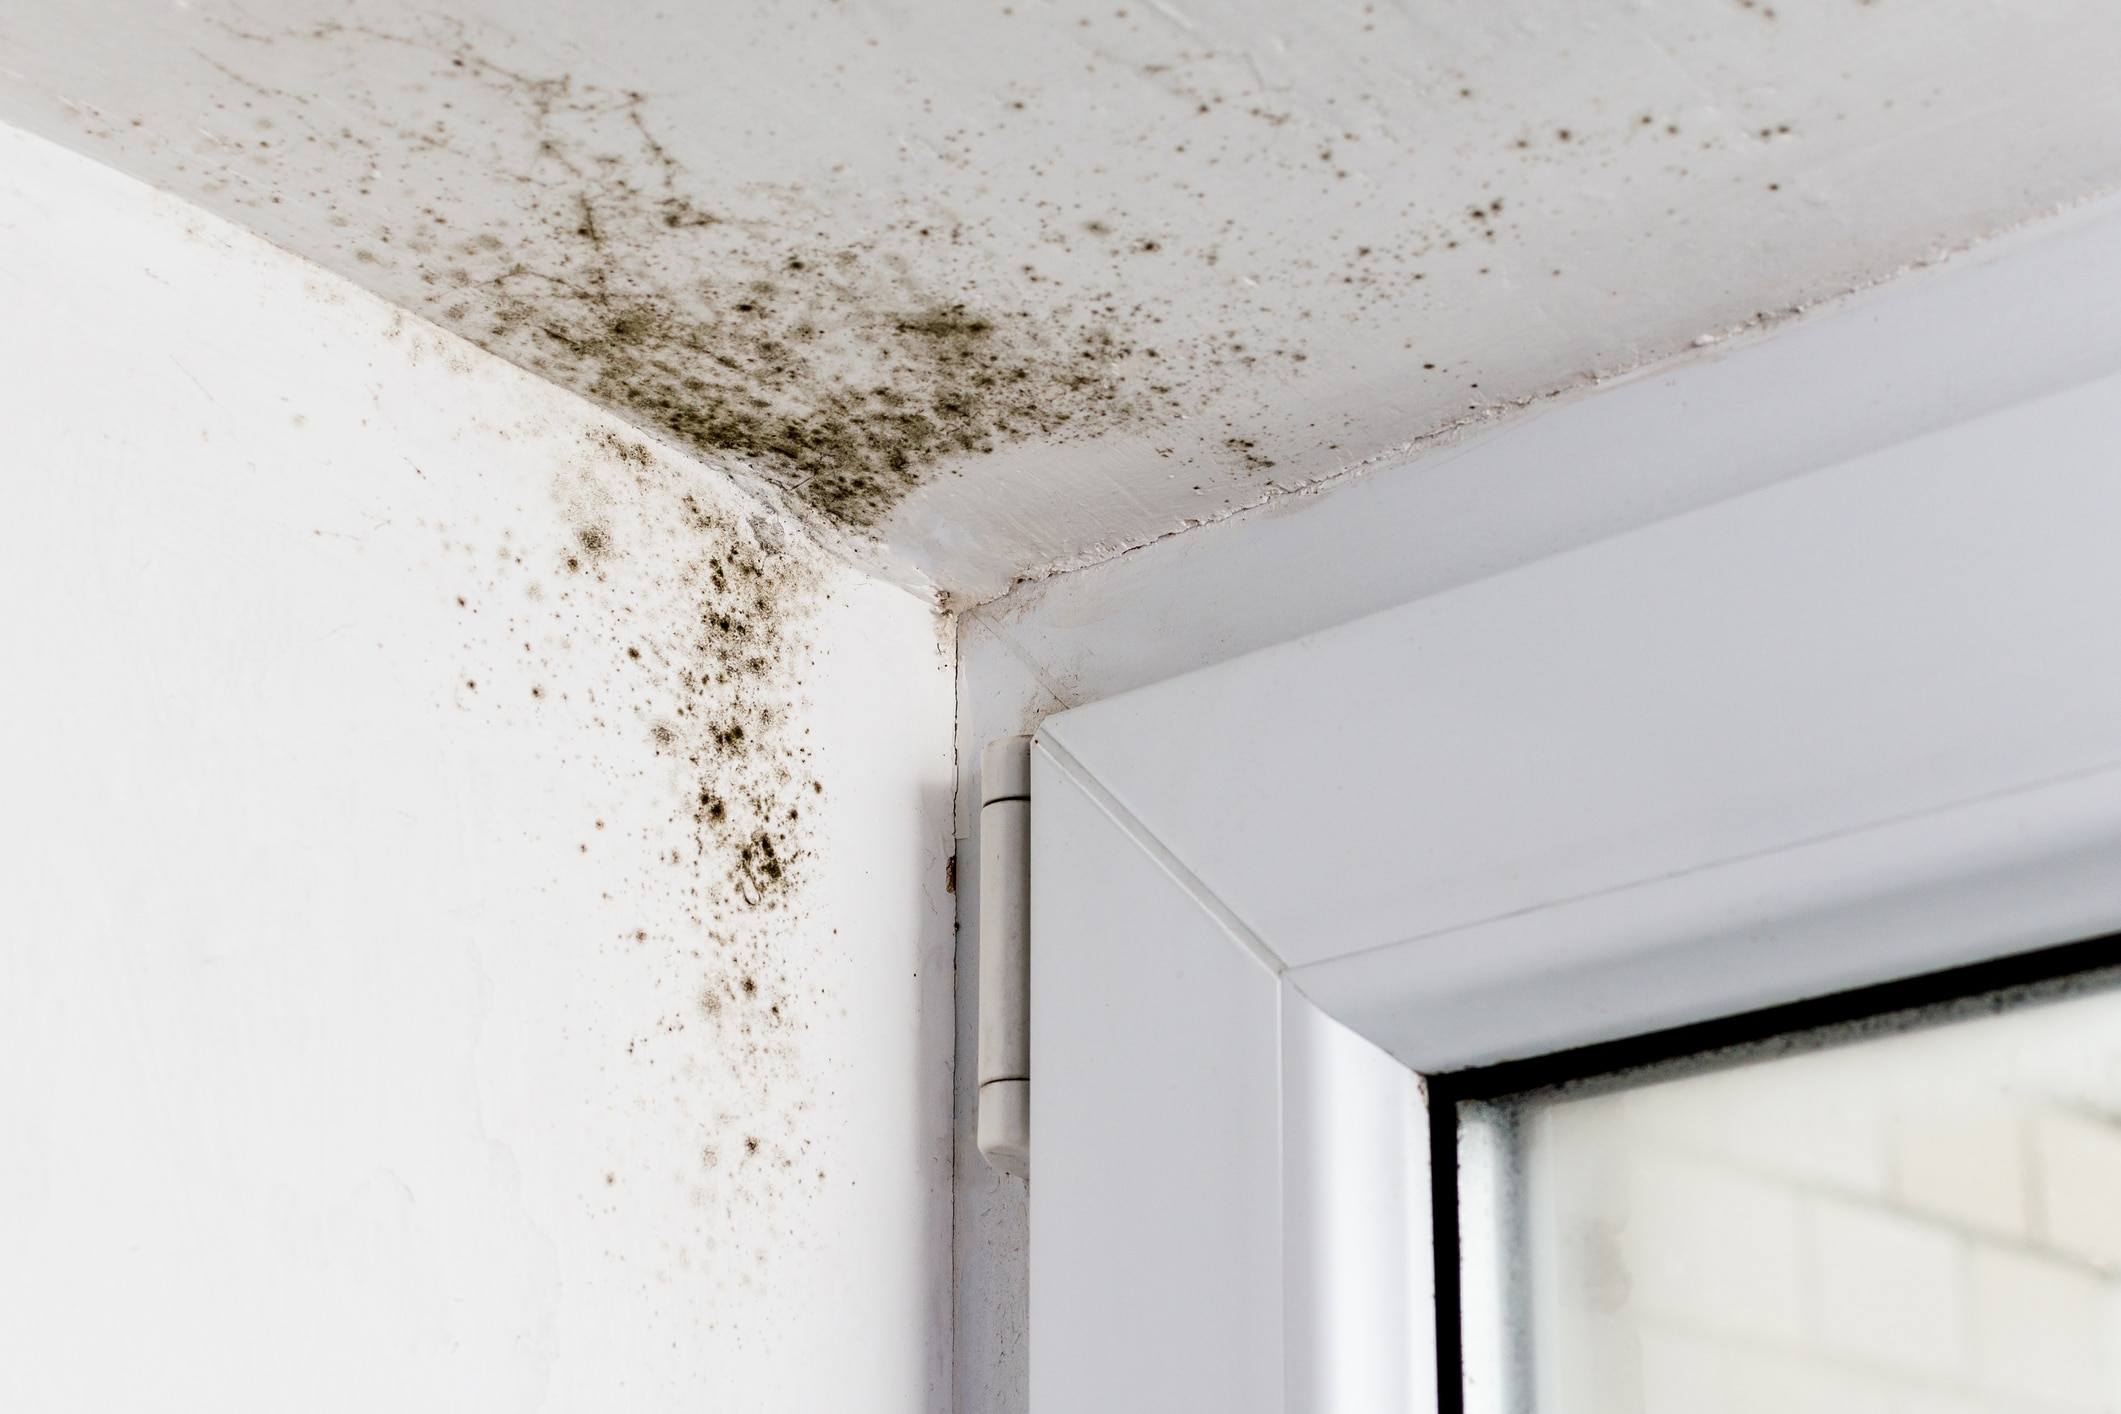 Mold in Home - Inspection services in Maryland 